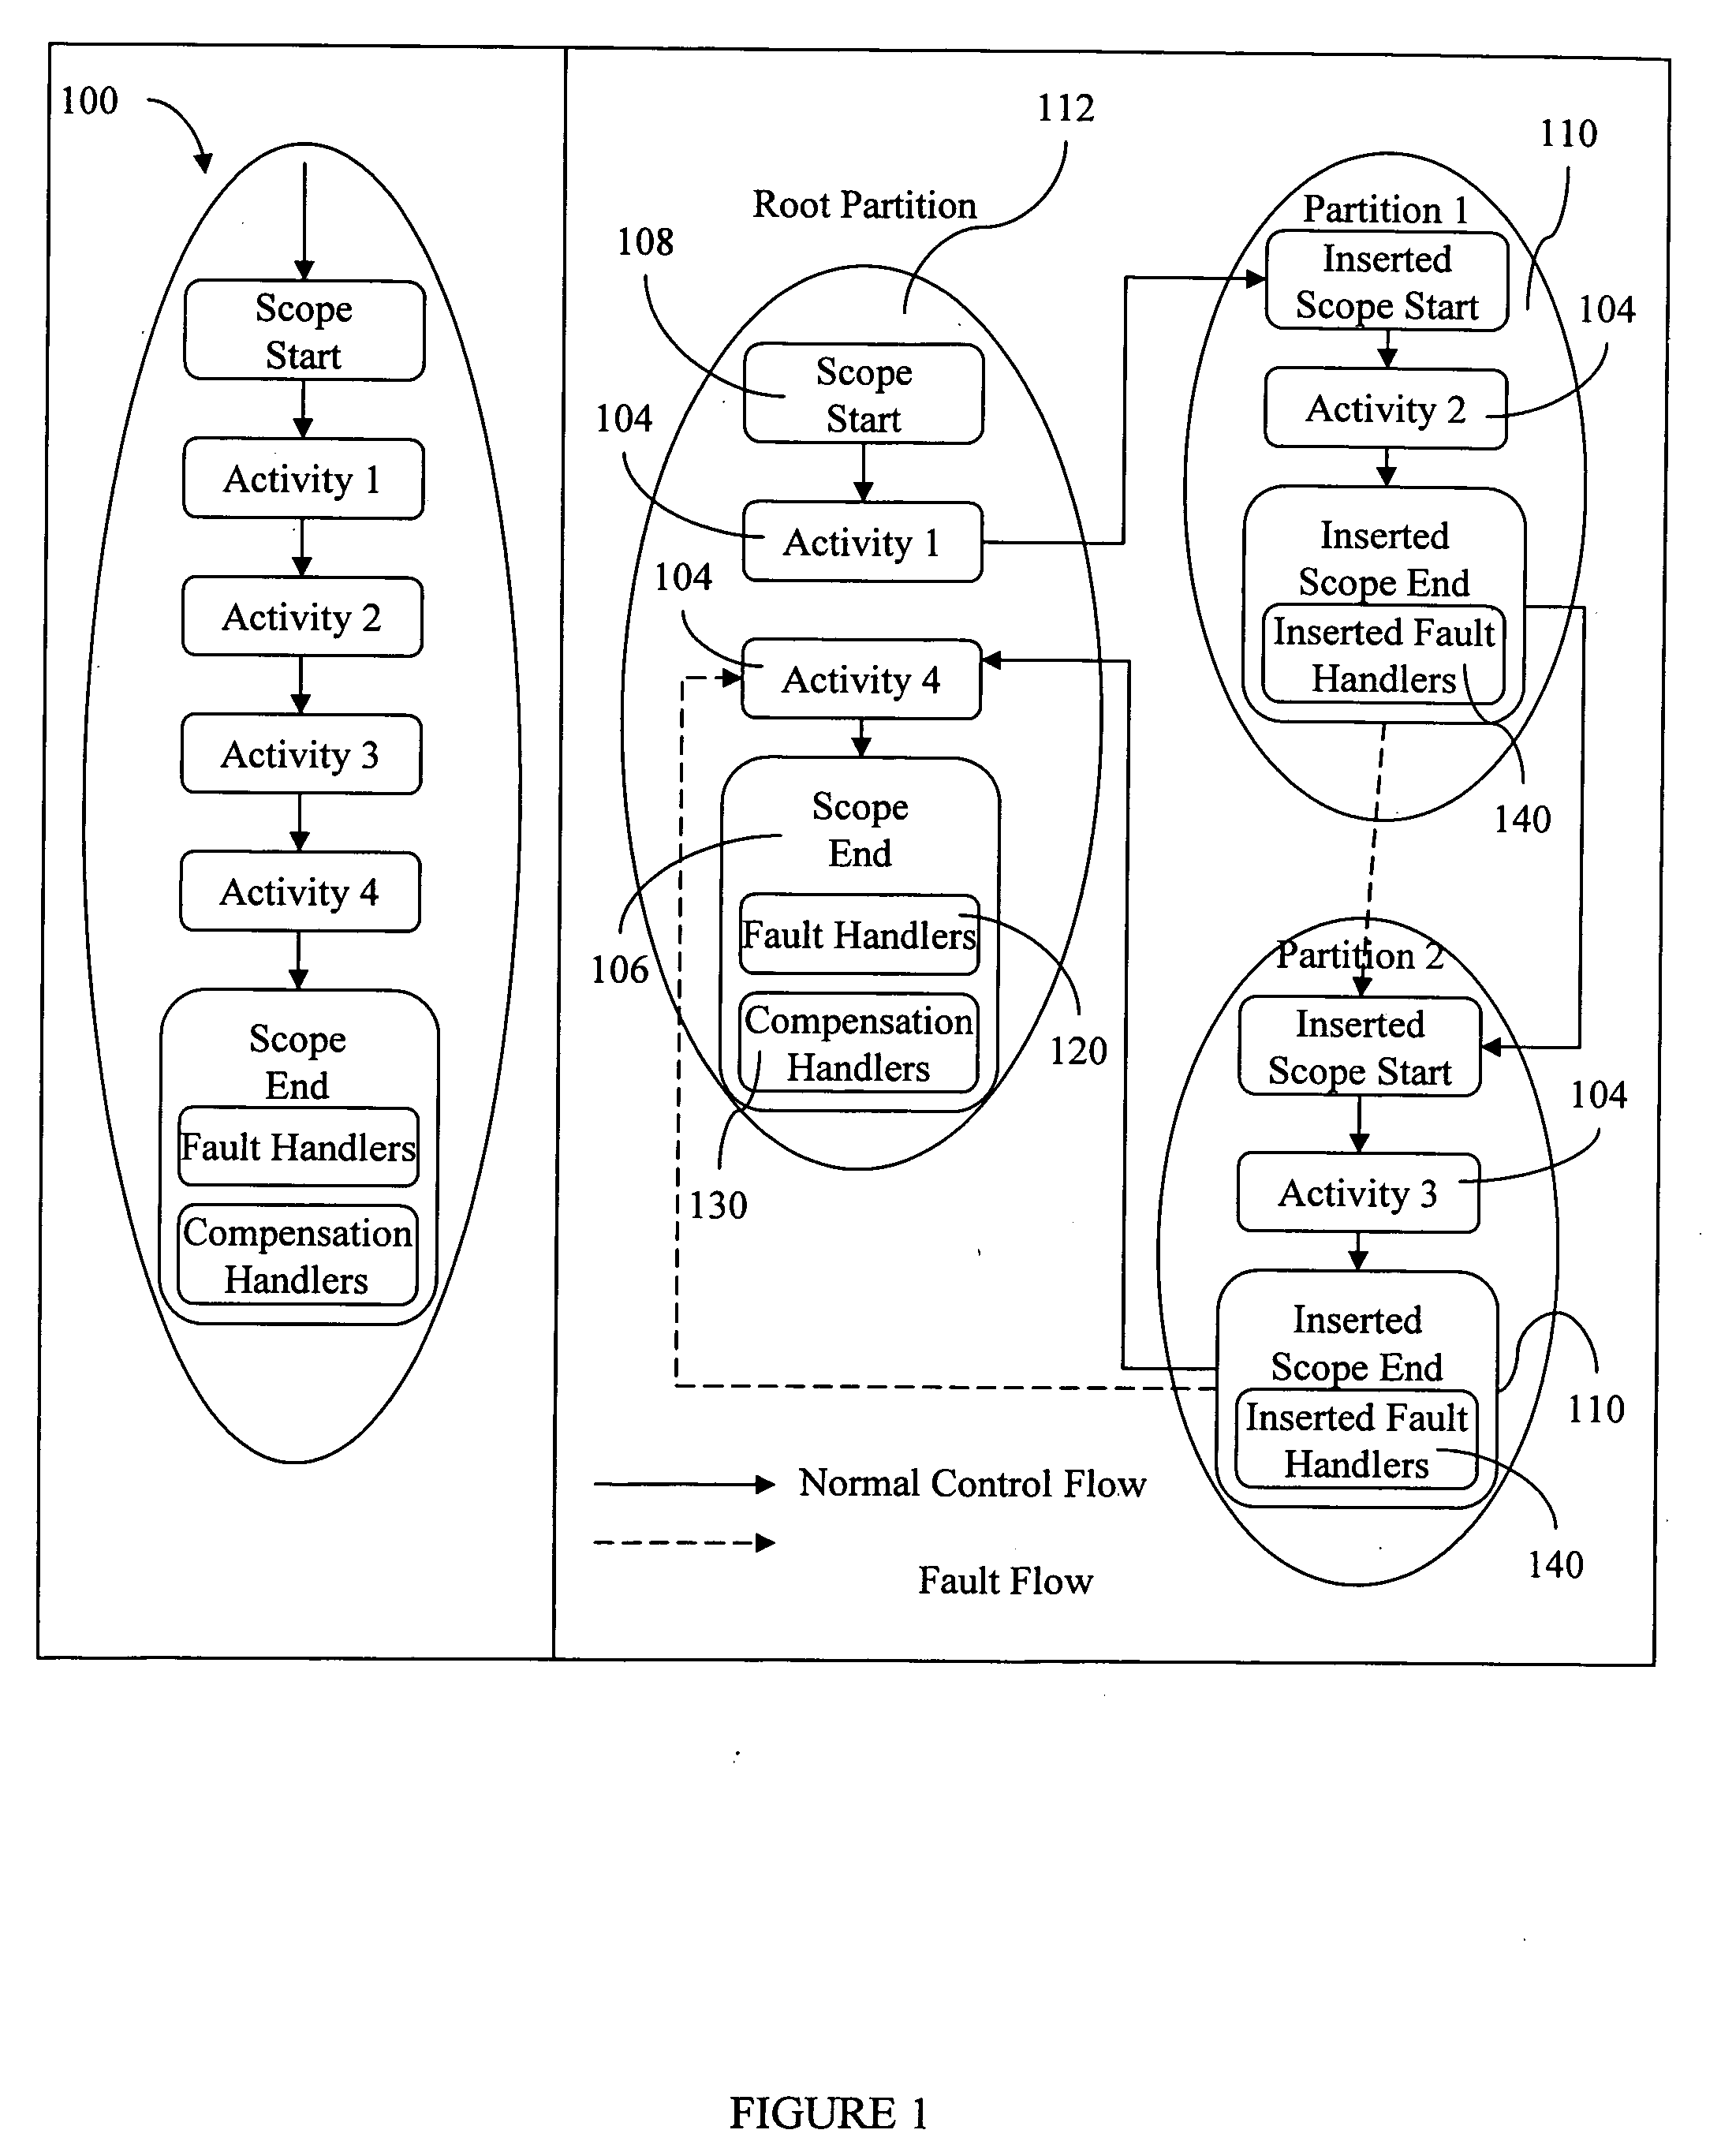 Method for fault handling in a co-operative workflow environment